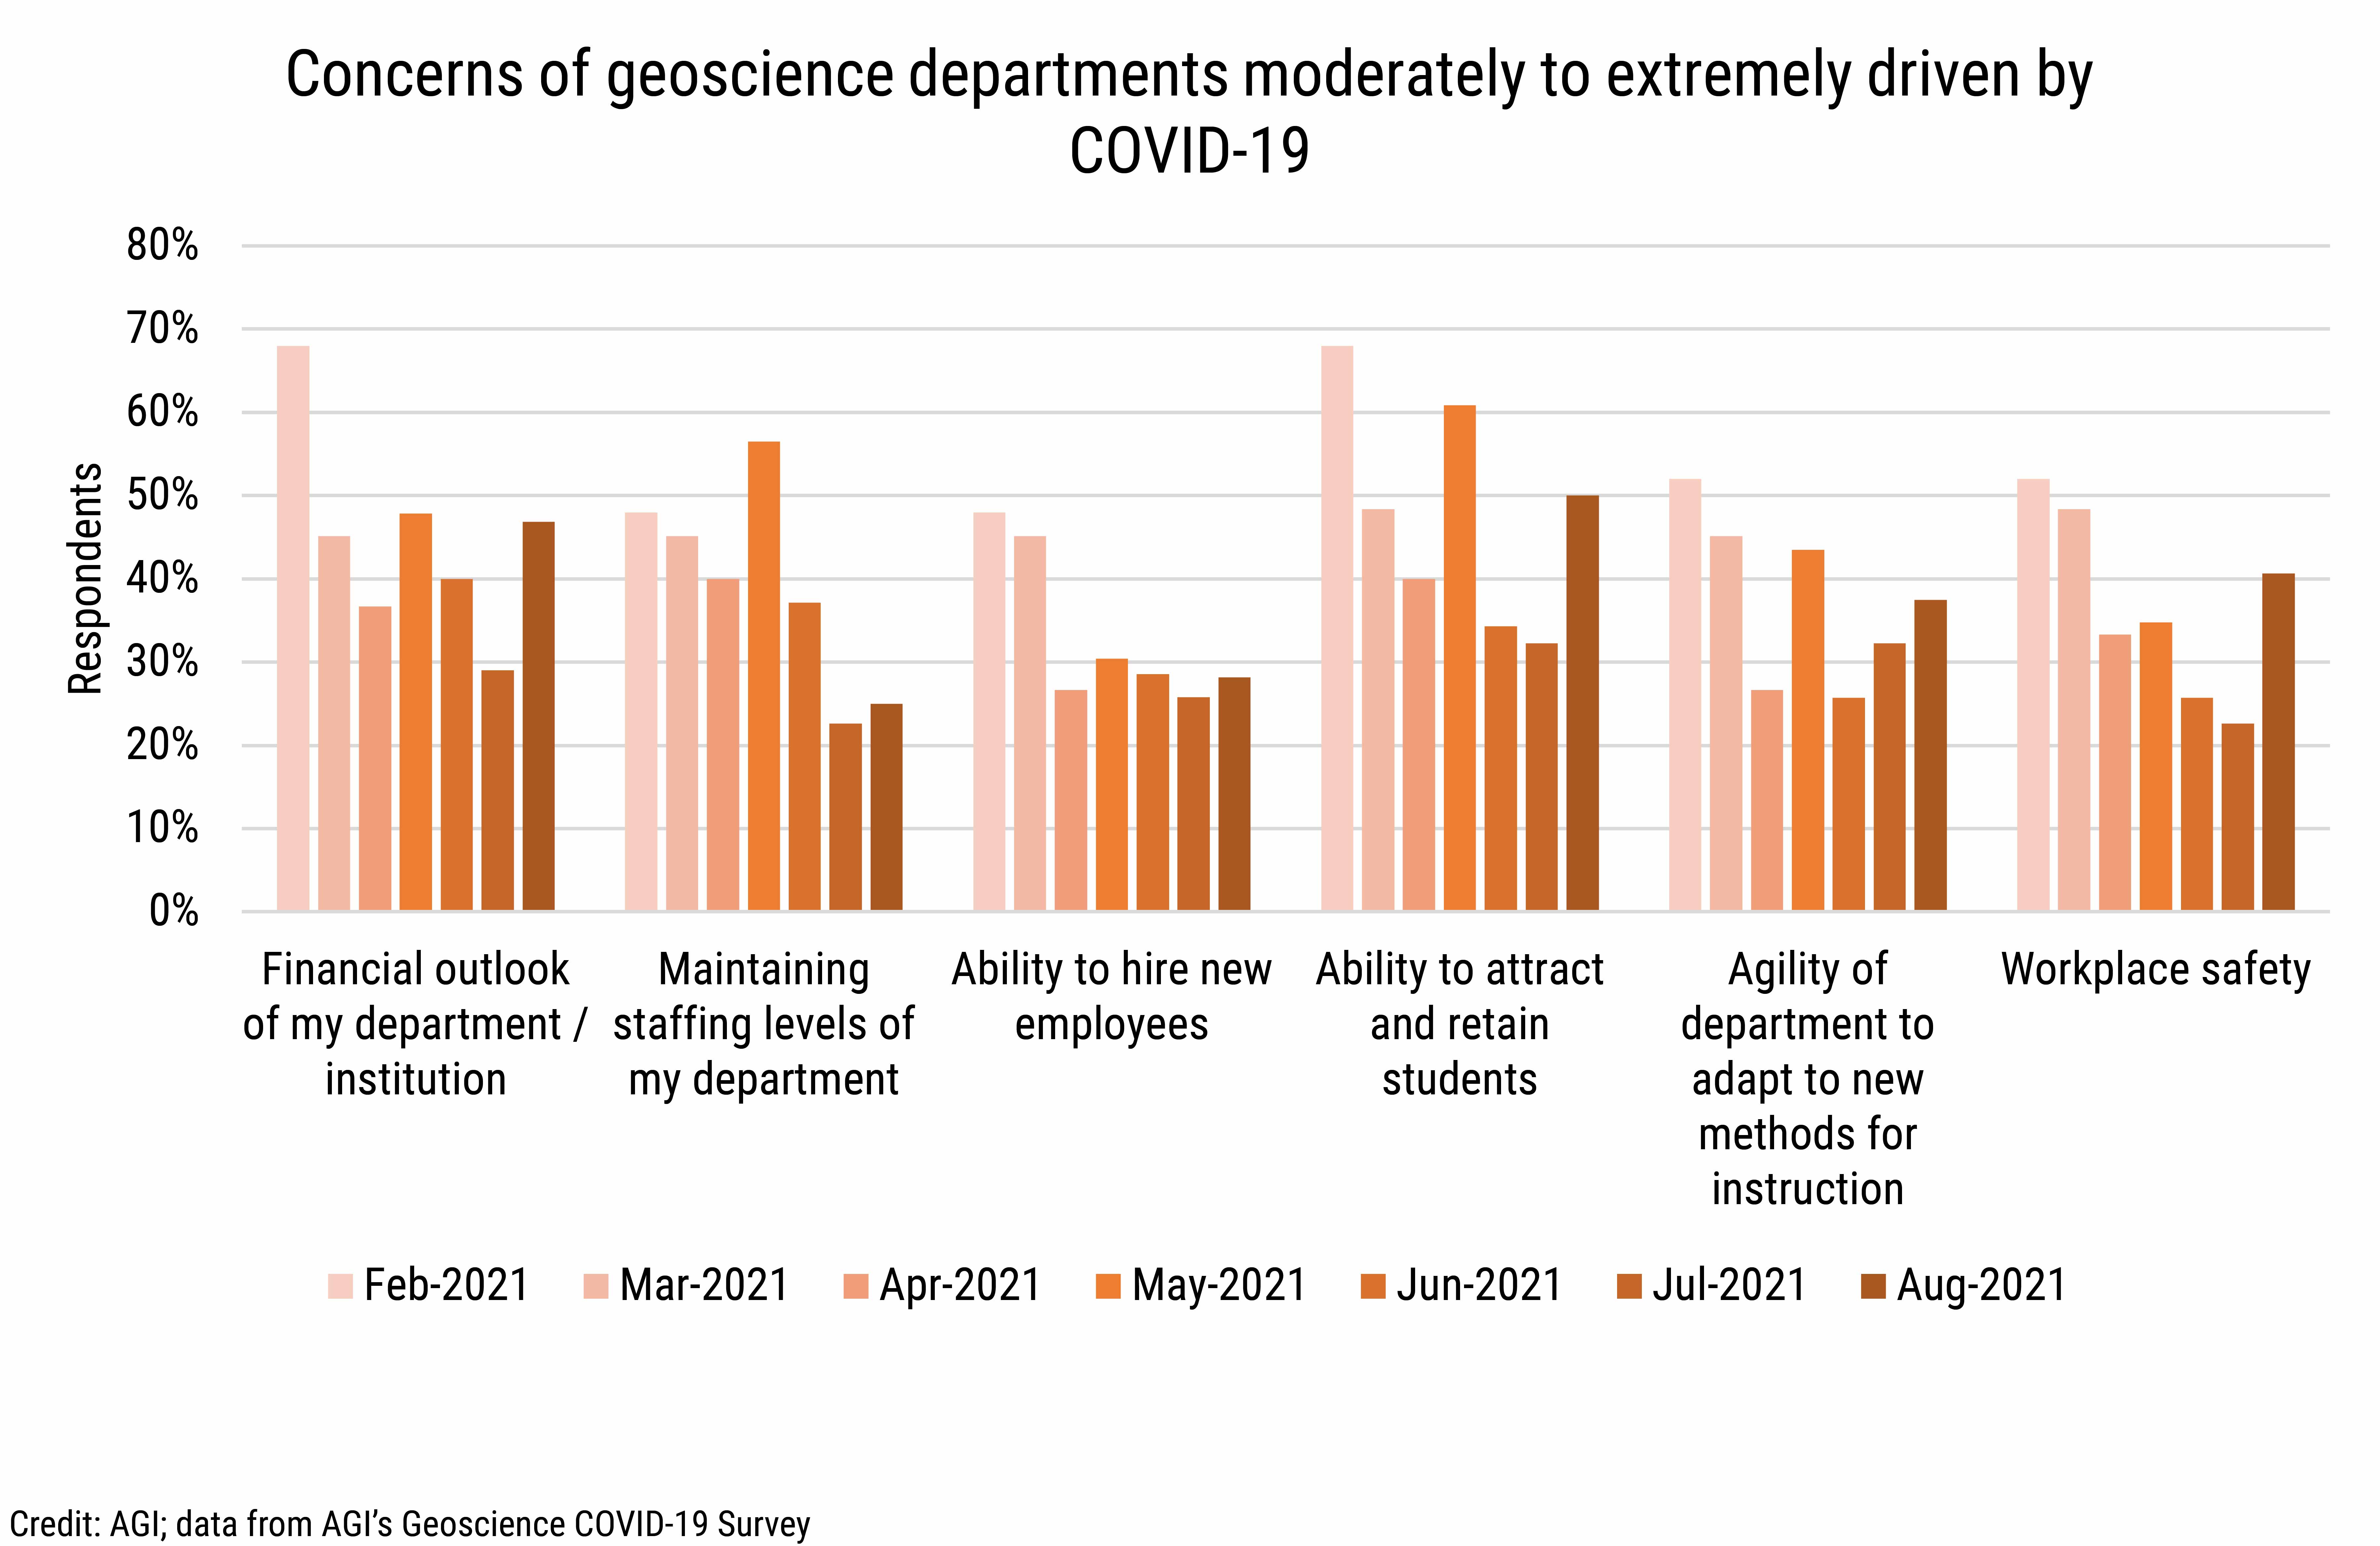 DB_2021-028 chart 07: Concerns of geoscience departments moderately to extremely driven by COVID-19 (Credit: AGI; data from AGI's Geoscience COVID-19 Survey)